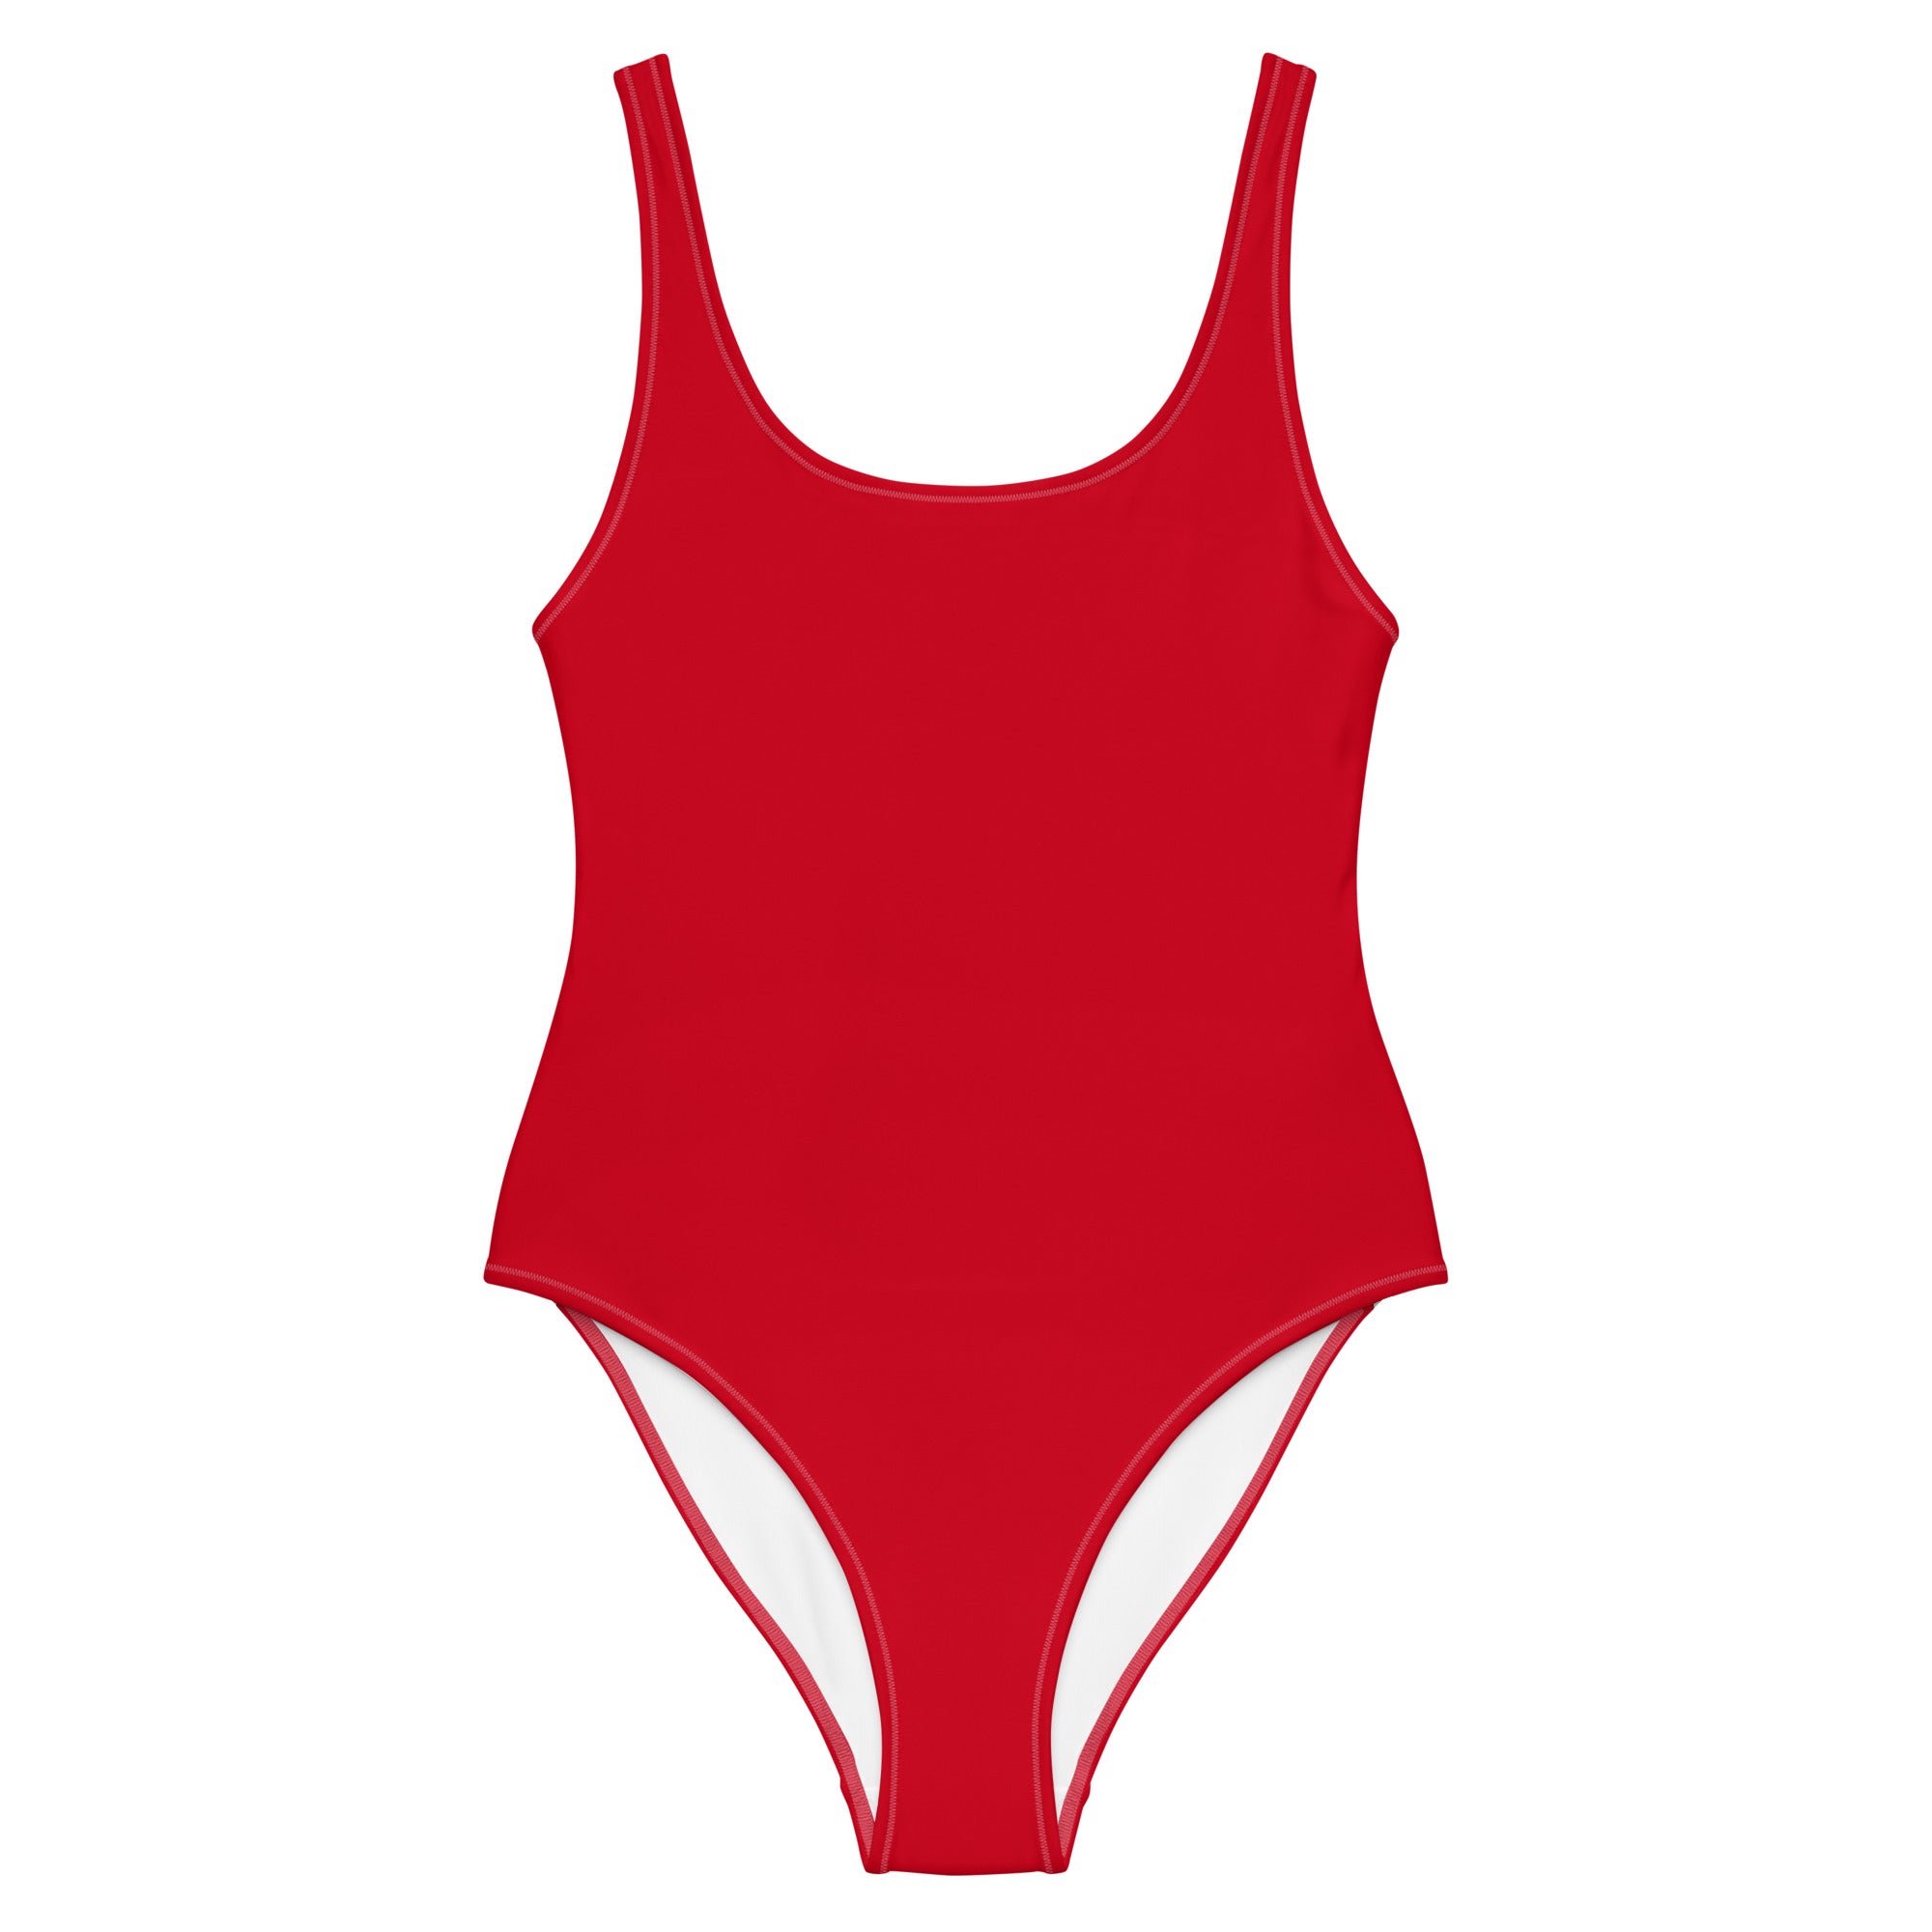 'Cherry Red' one-piece swimsuit